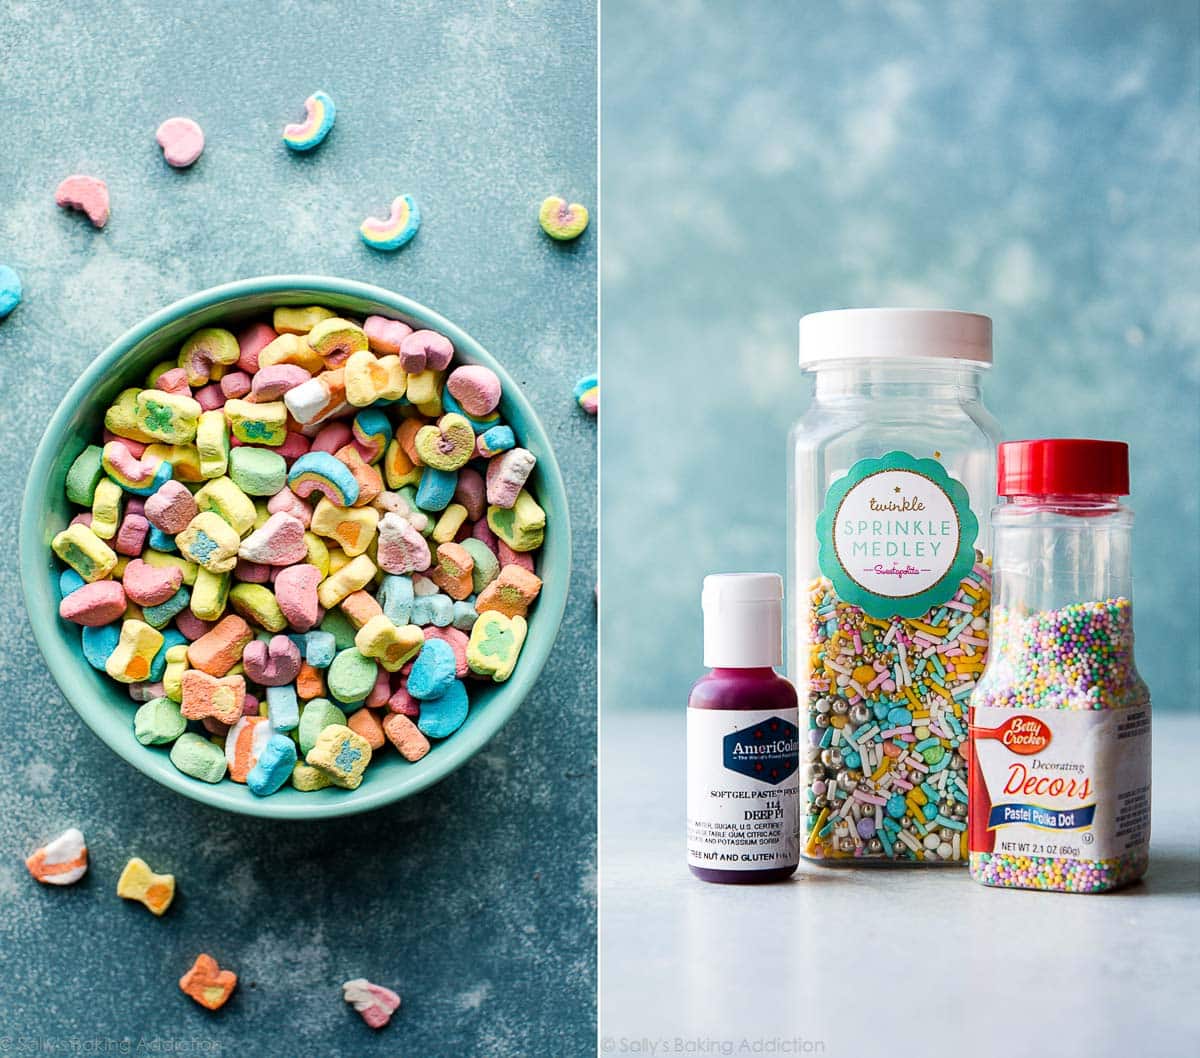 2 images of marshmallows from Lucky Charms cereal in a bowl and food coloring and sprinkles